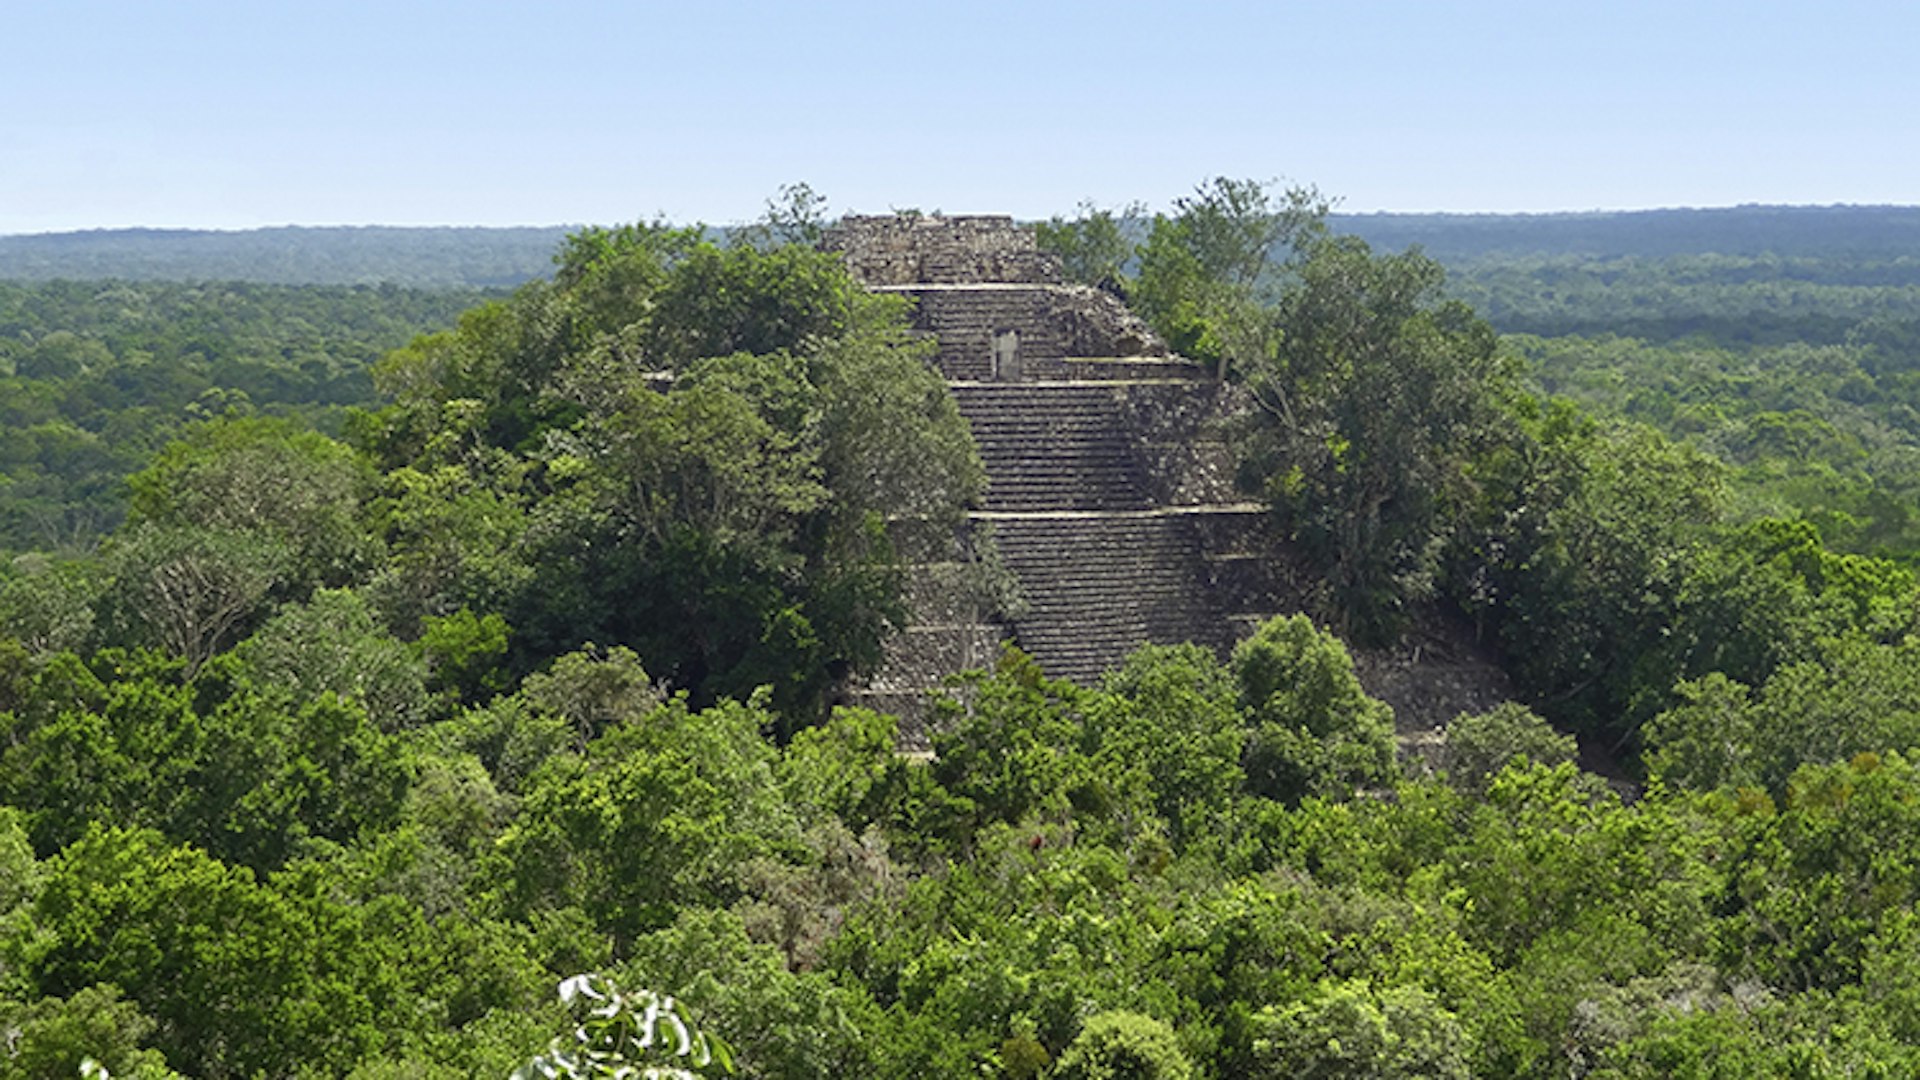 The pyramids of Calakmul – the tallest in Mexico – poke out of the surrounding jungle. Image by Prill Mediendesign & Fotografie / iStock / Getty Images